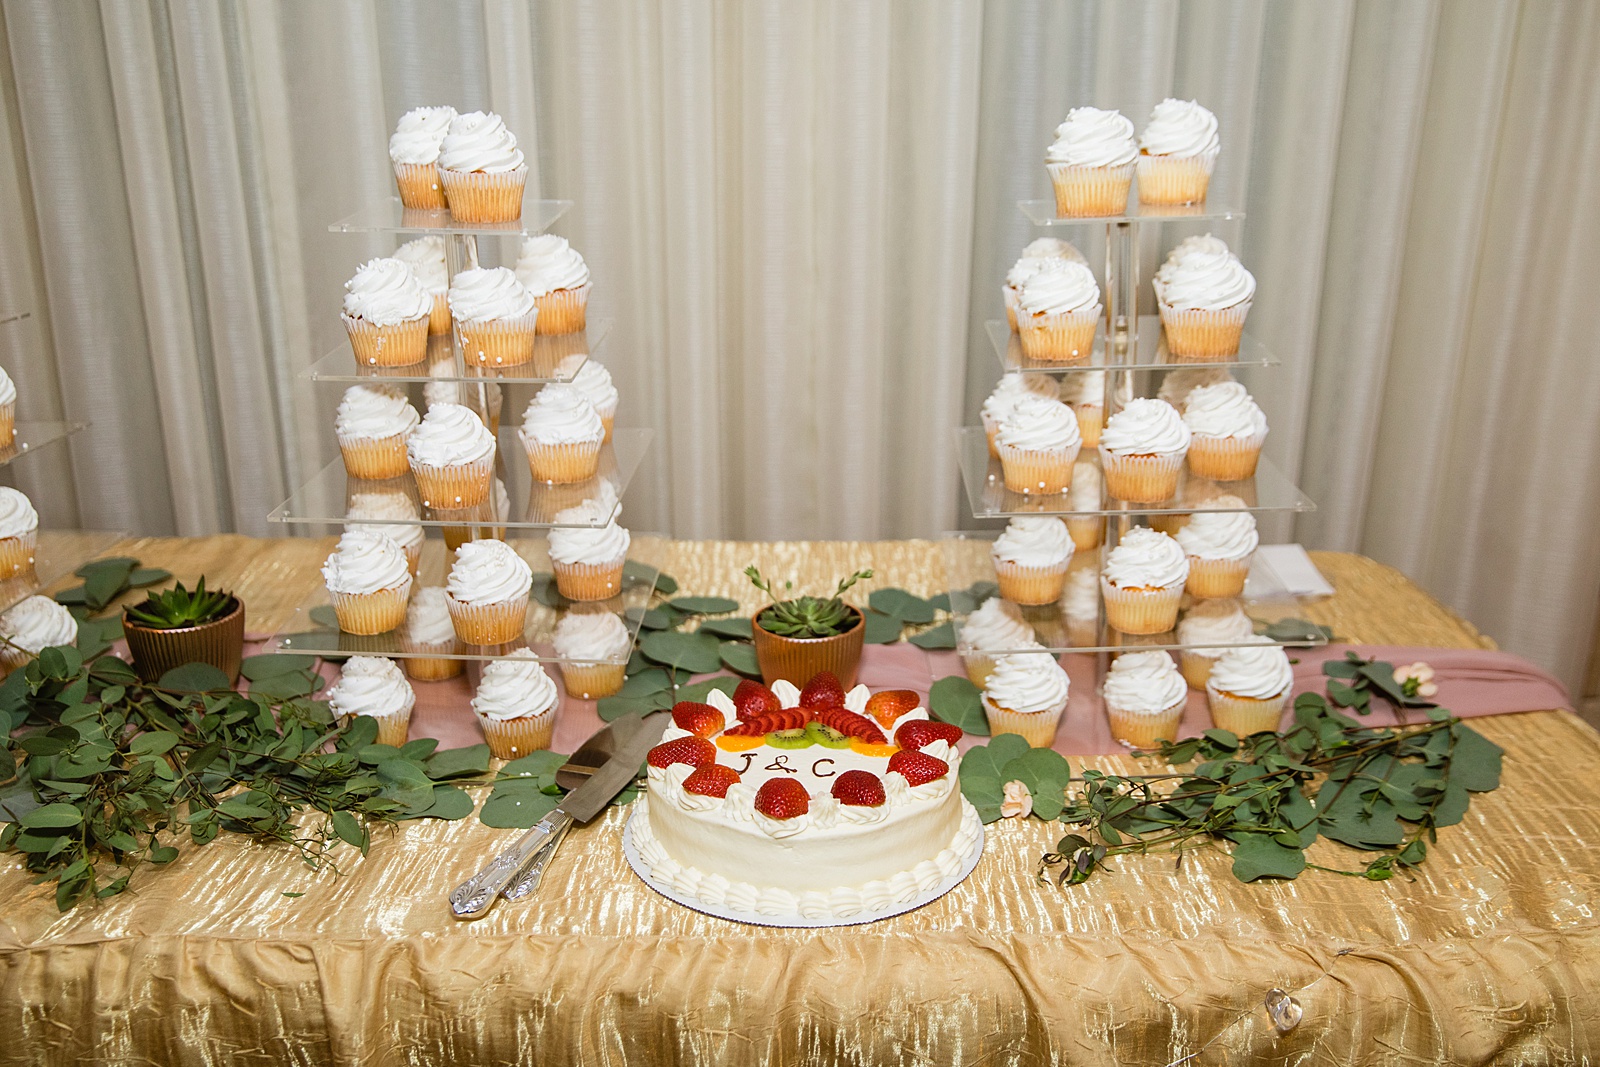 Simple wedding cake with fruit and white cupcakes on cupcake stands.